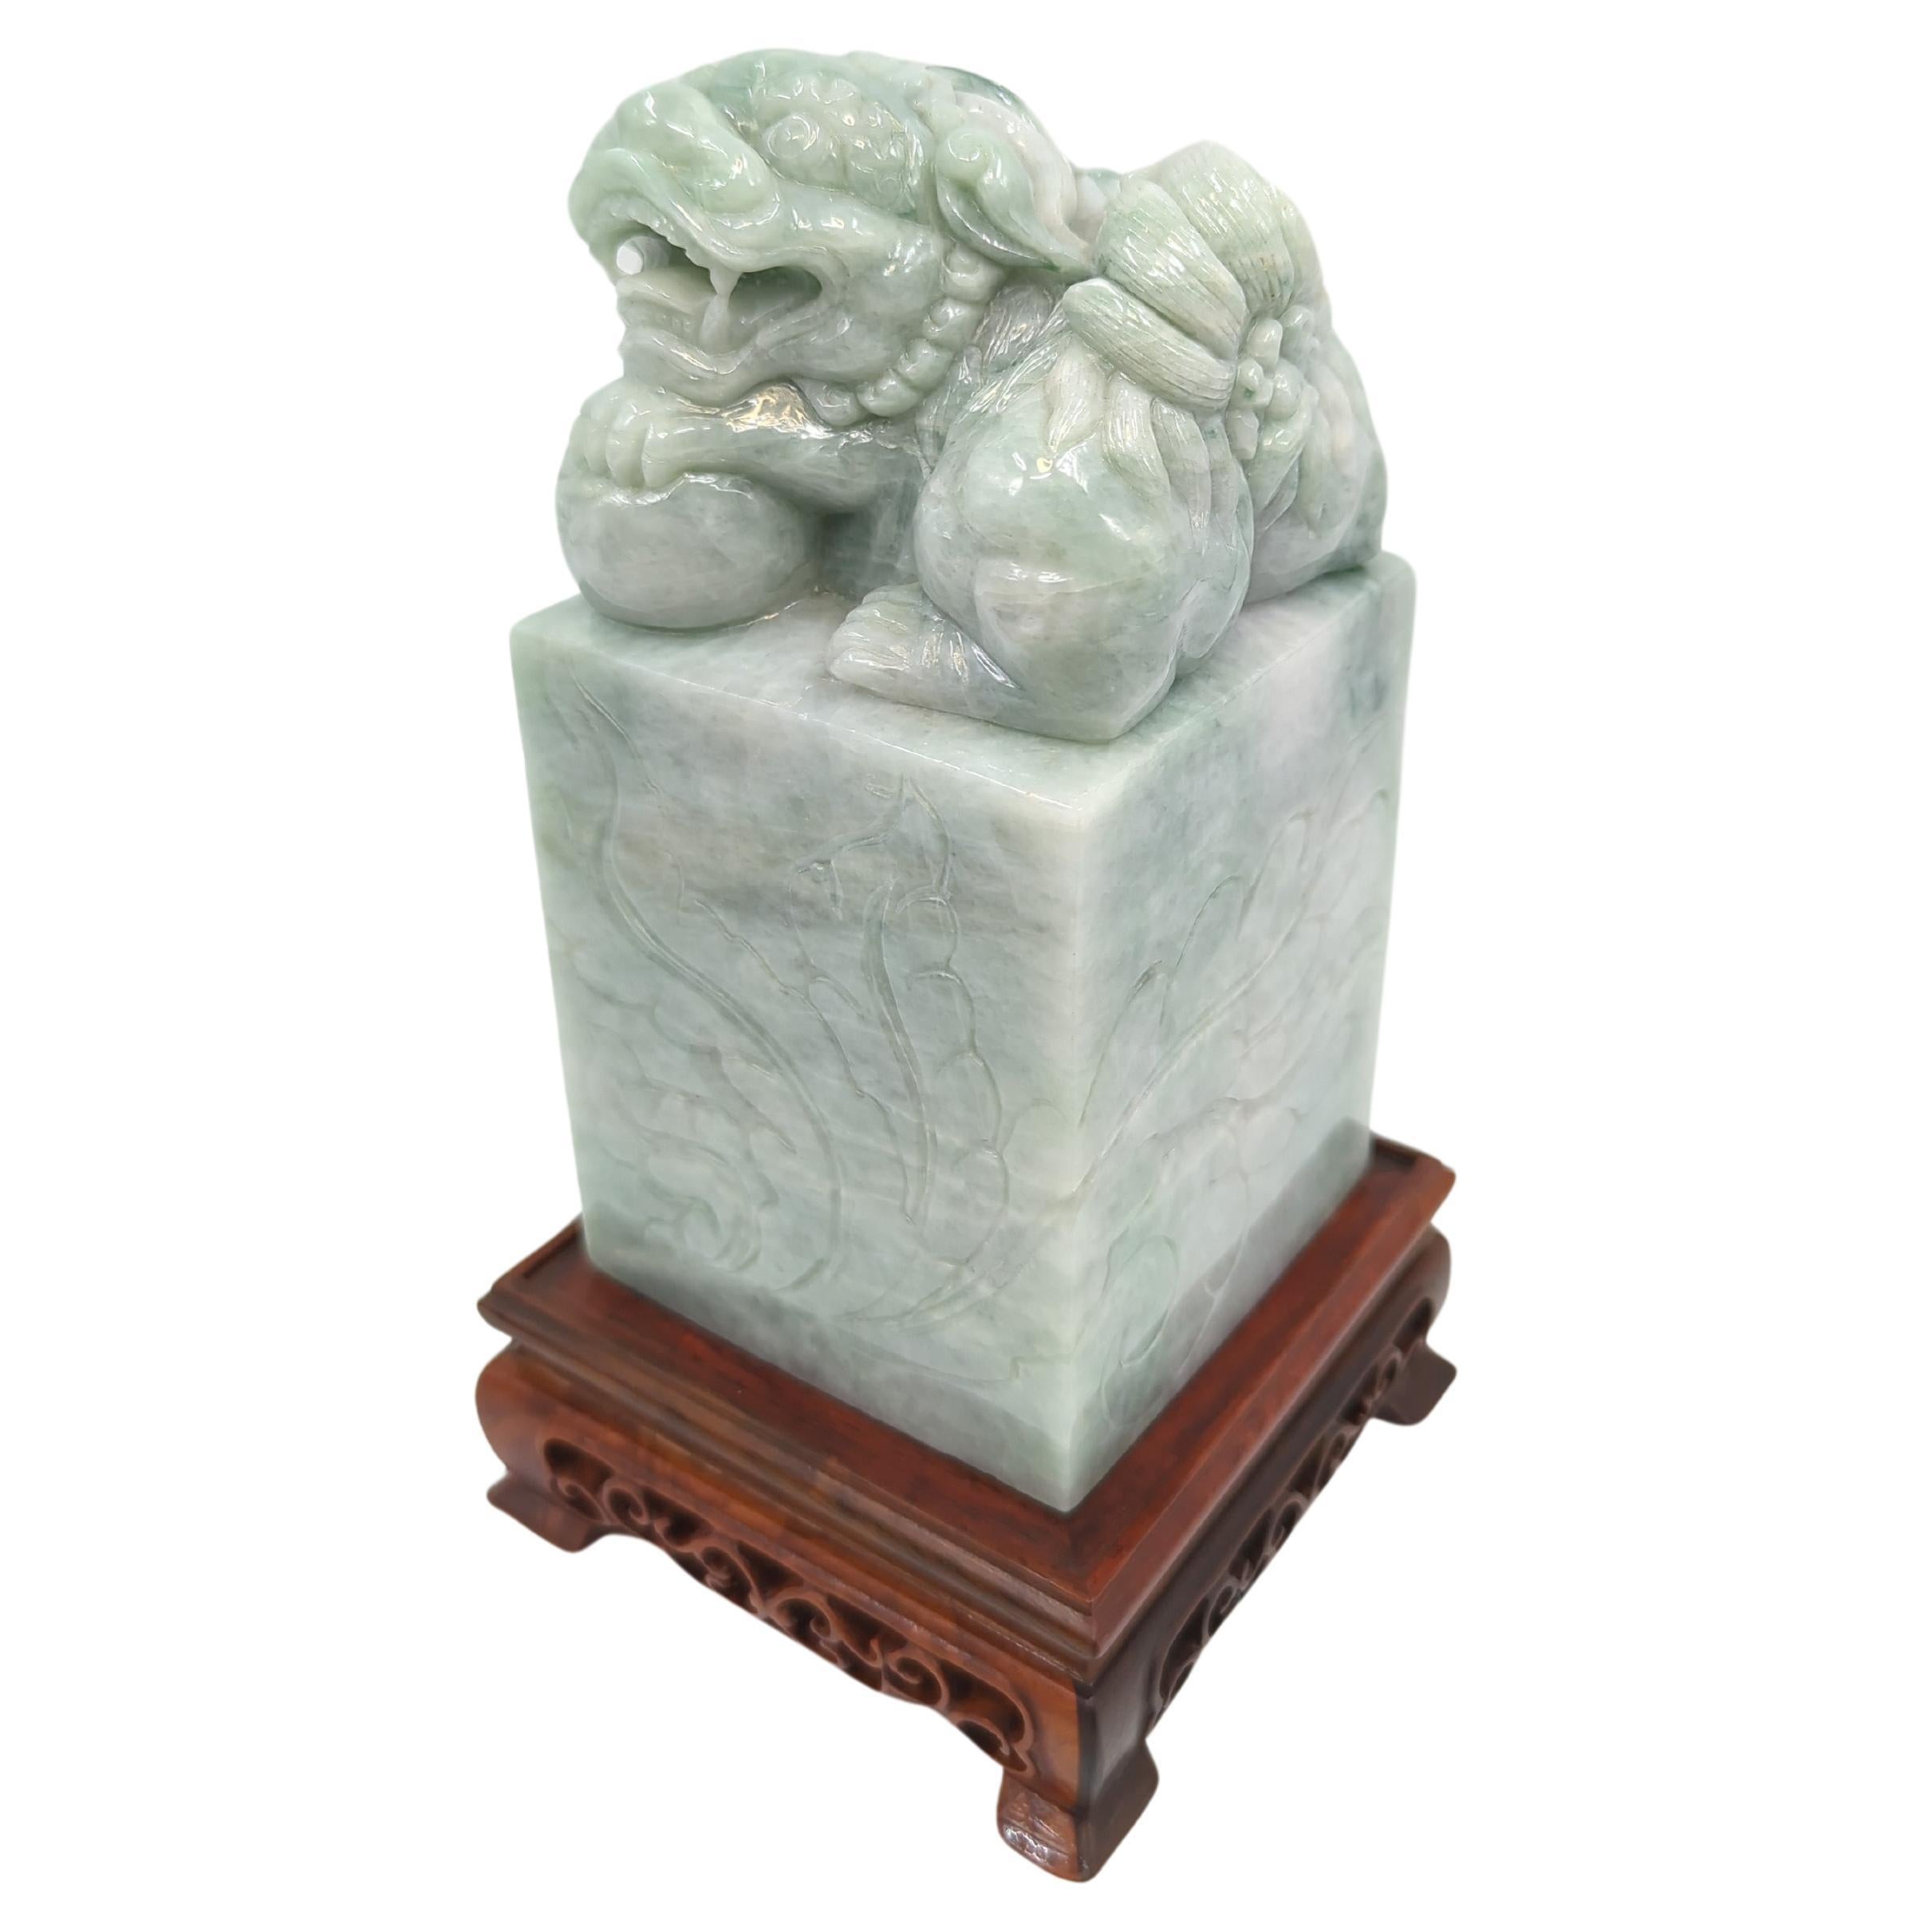 This modern Chinese jadeite seal stone, standing at an impressive 8 inches on its stand, is a remarkable piece of artistry, showcasing the exquisite craftsmanship associated with contemporary Chinese jade carving. Carved on a square base, the seal